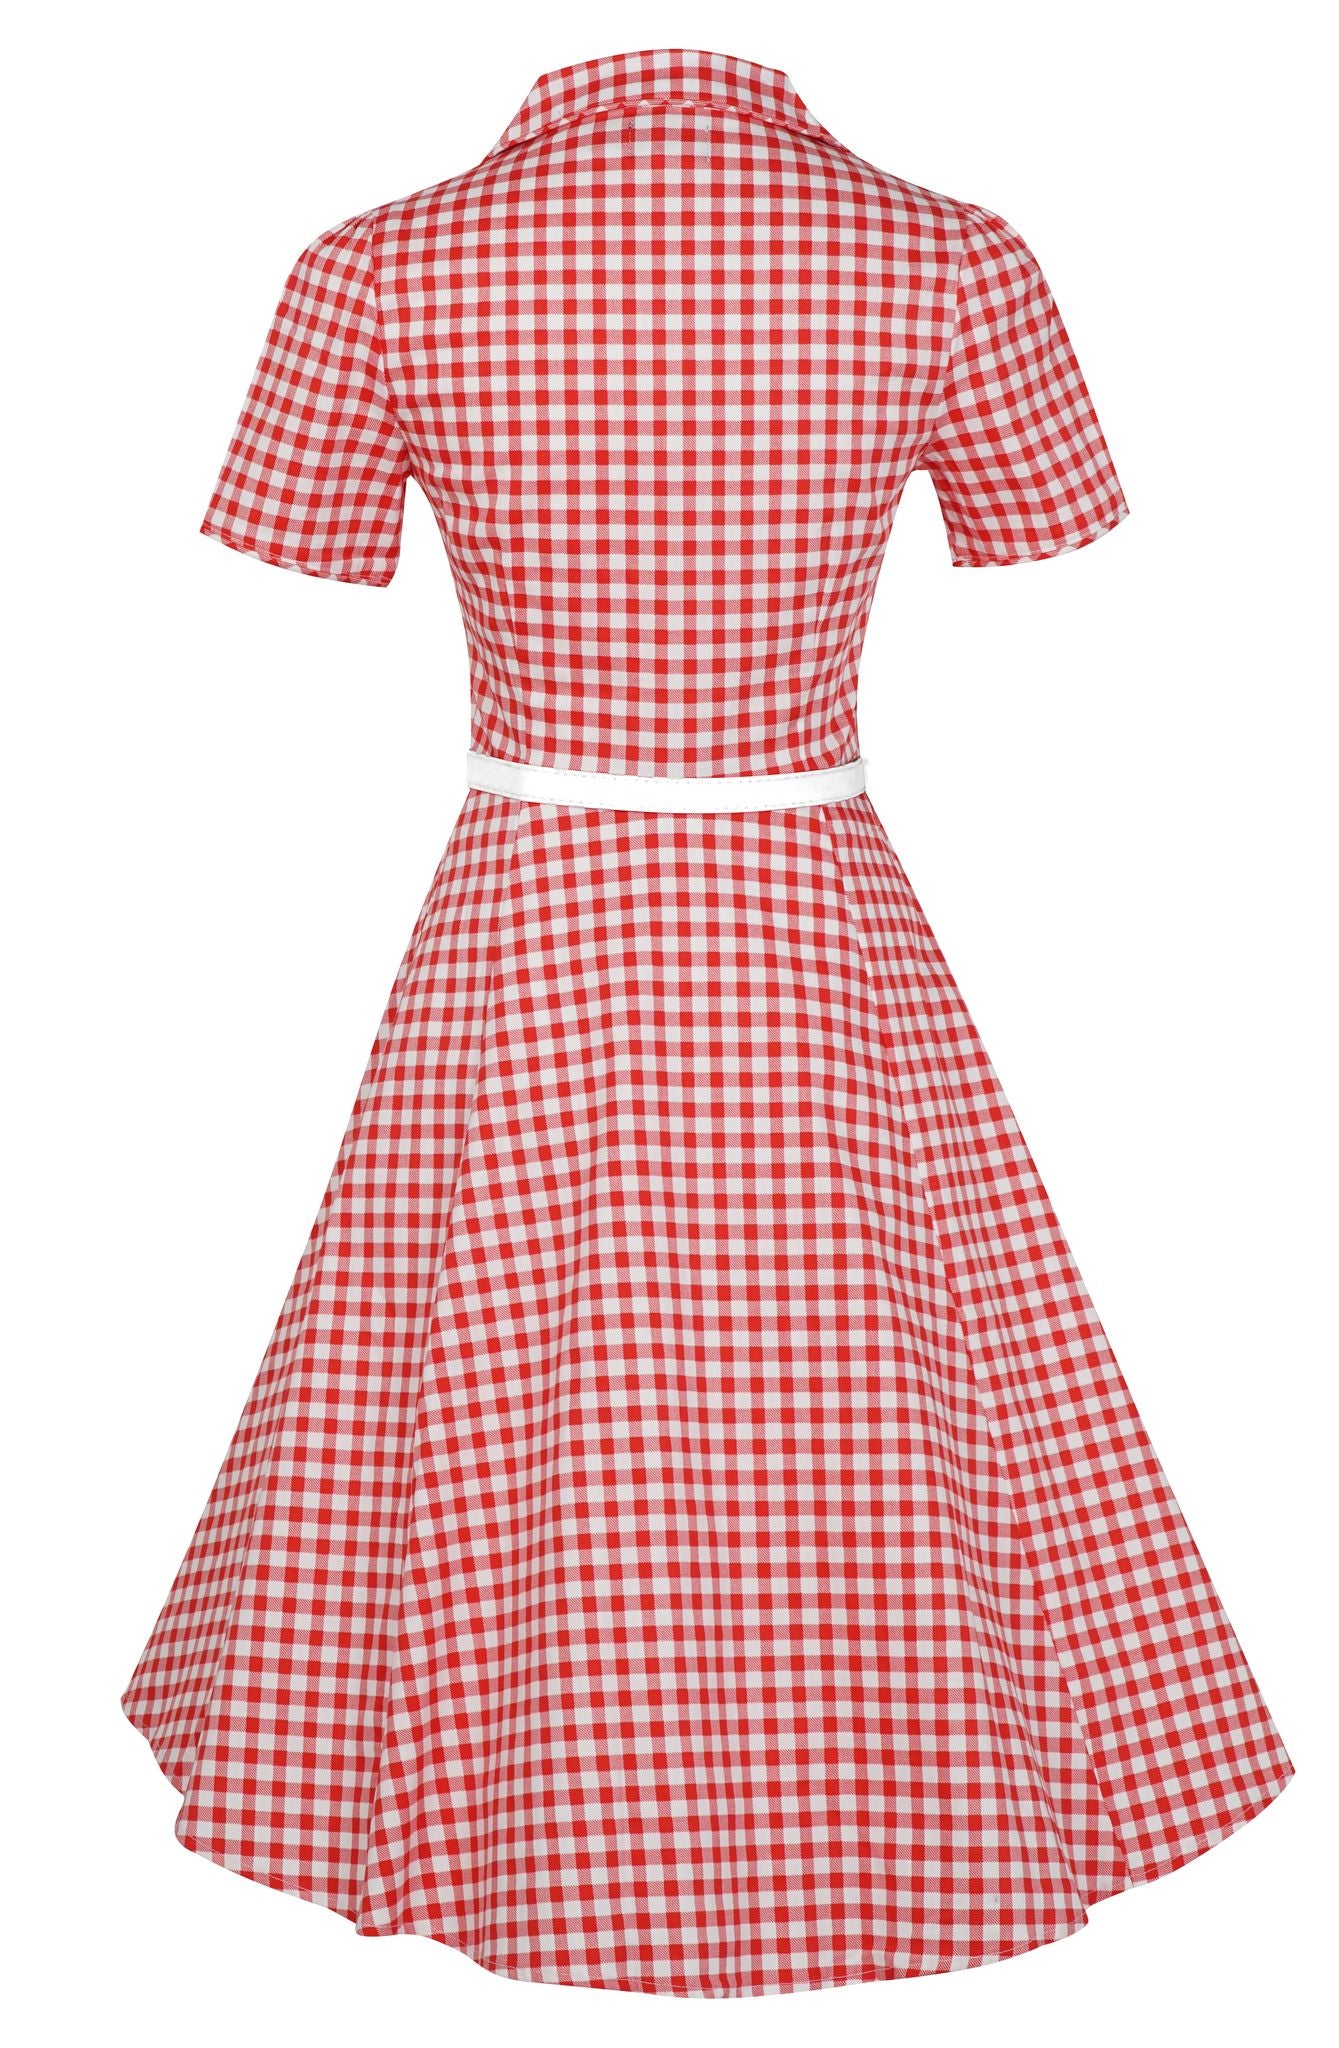 Short sleeve Penelope dress, in red and white gingham print, back view